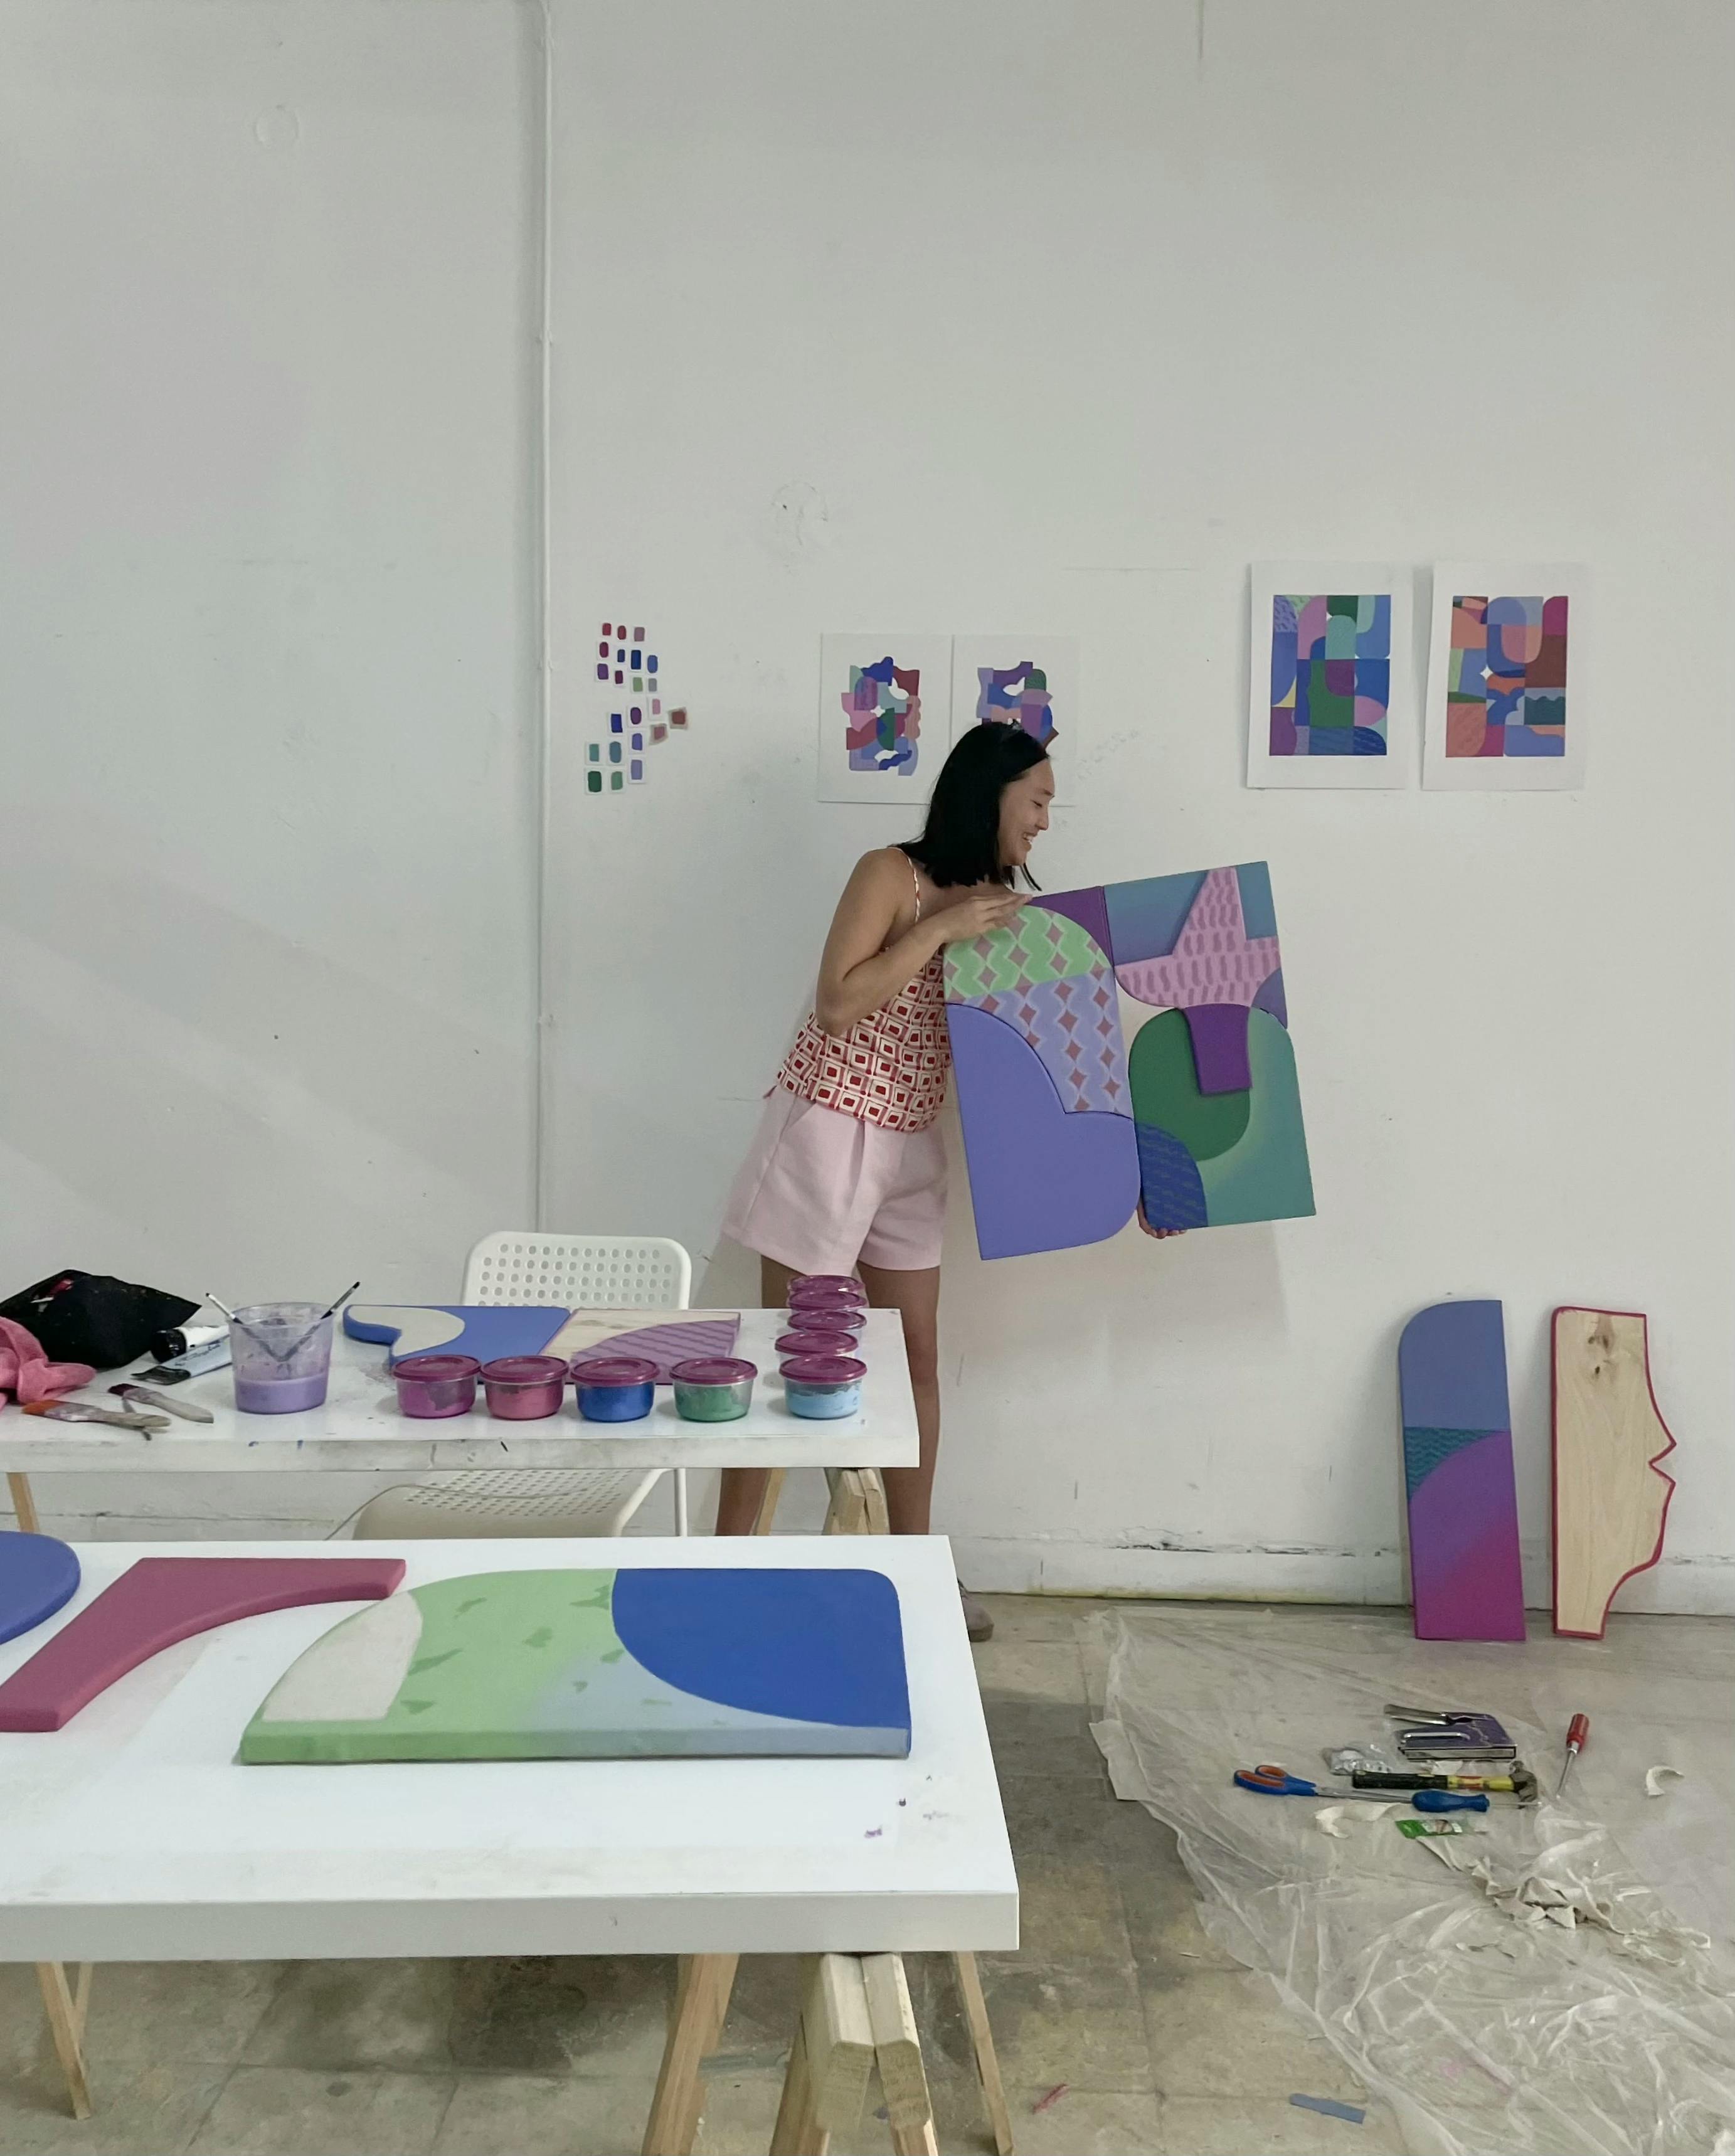 Artist Bbblob holding a colorful shaped canvas with geometric patterns in her studio.